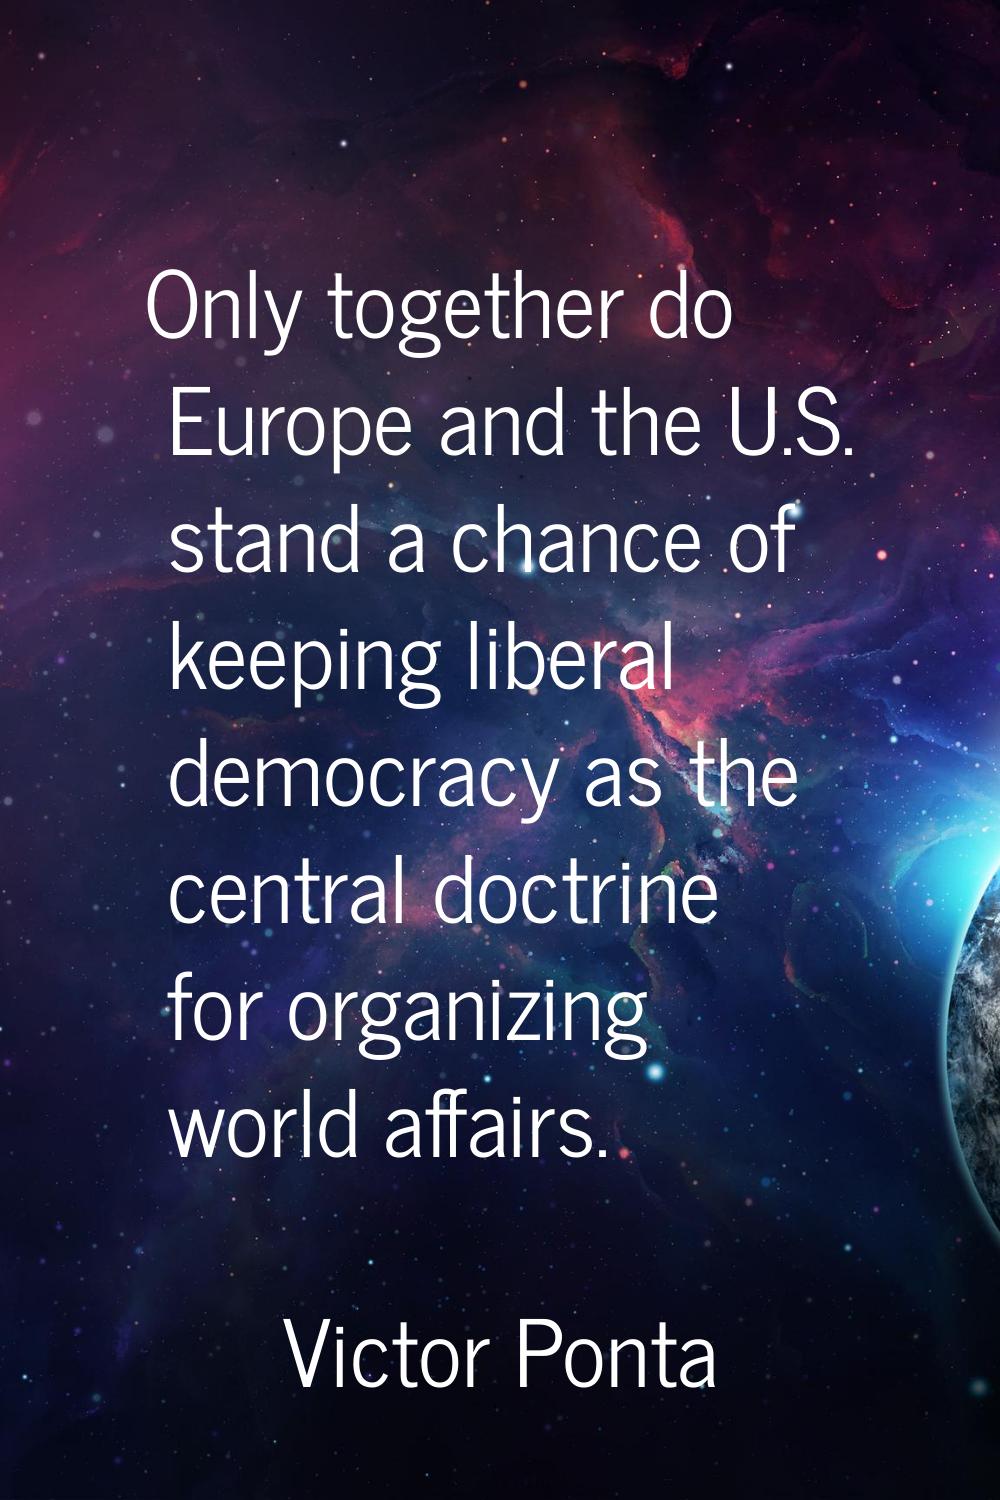 Only together do Europe and the U.S. stand a chance of keeping liberal democracy as the central doc